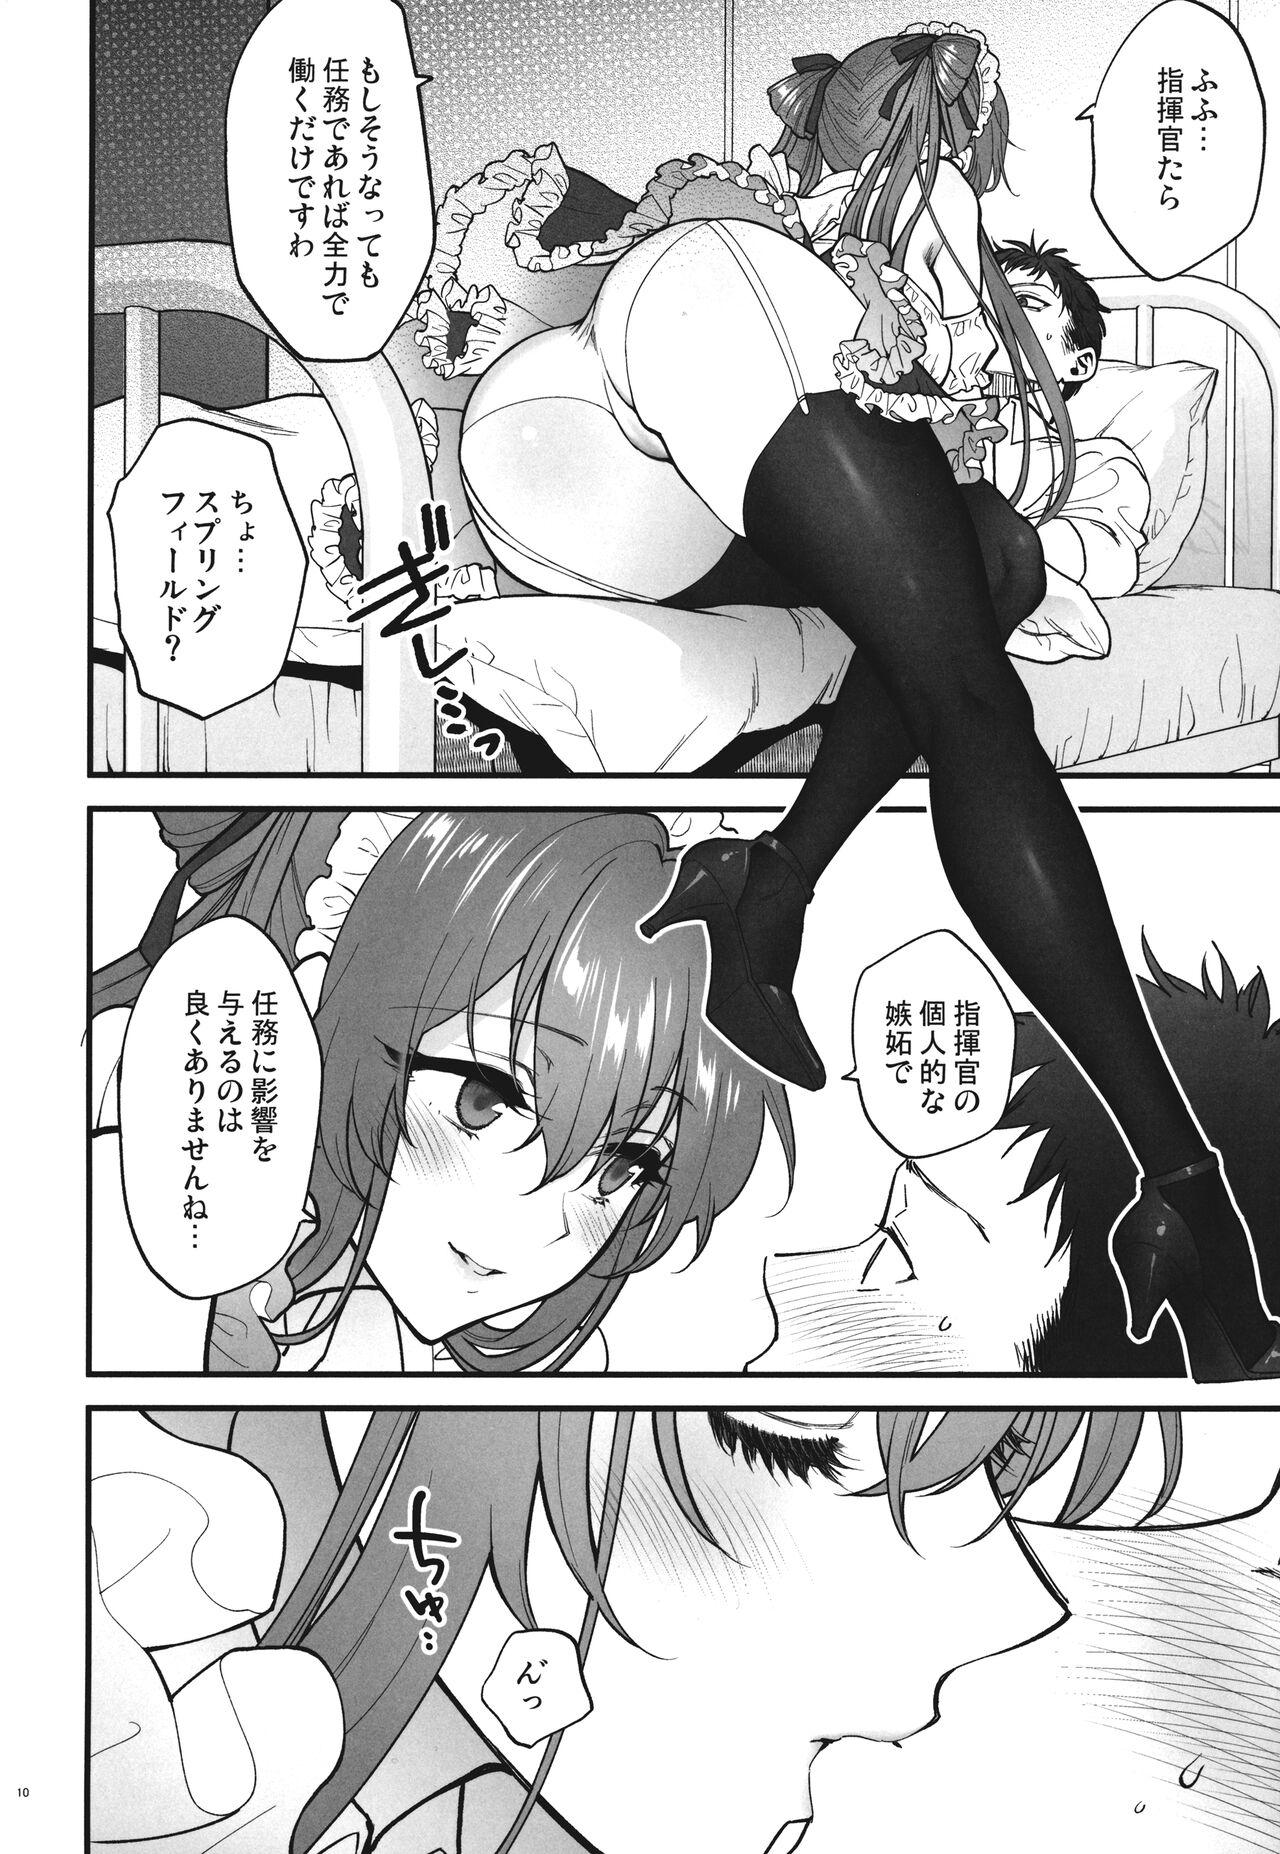 Assfucking Make me Yours - Girls frontline Sapphicerotica - Page 9